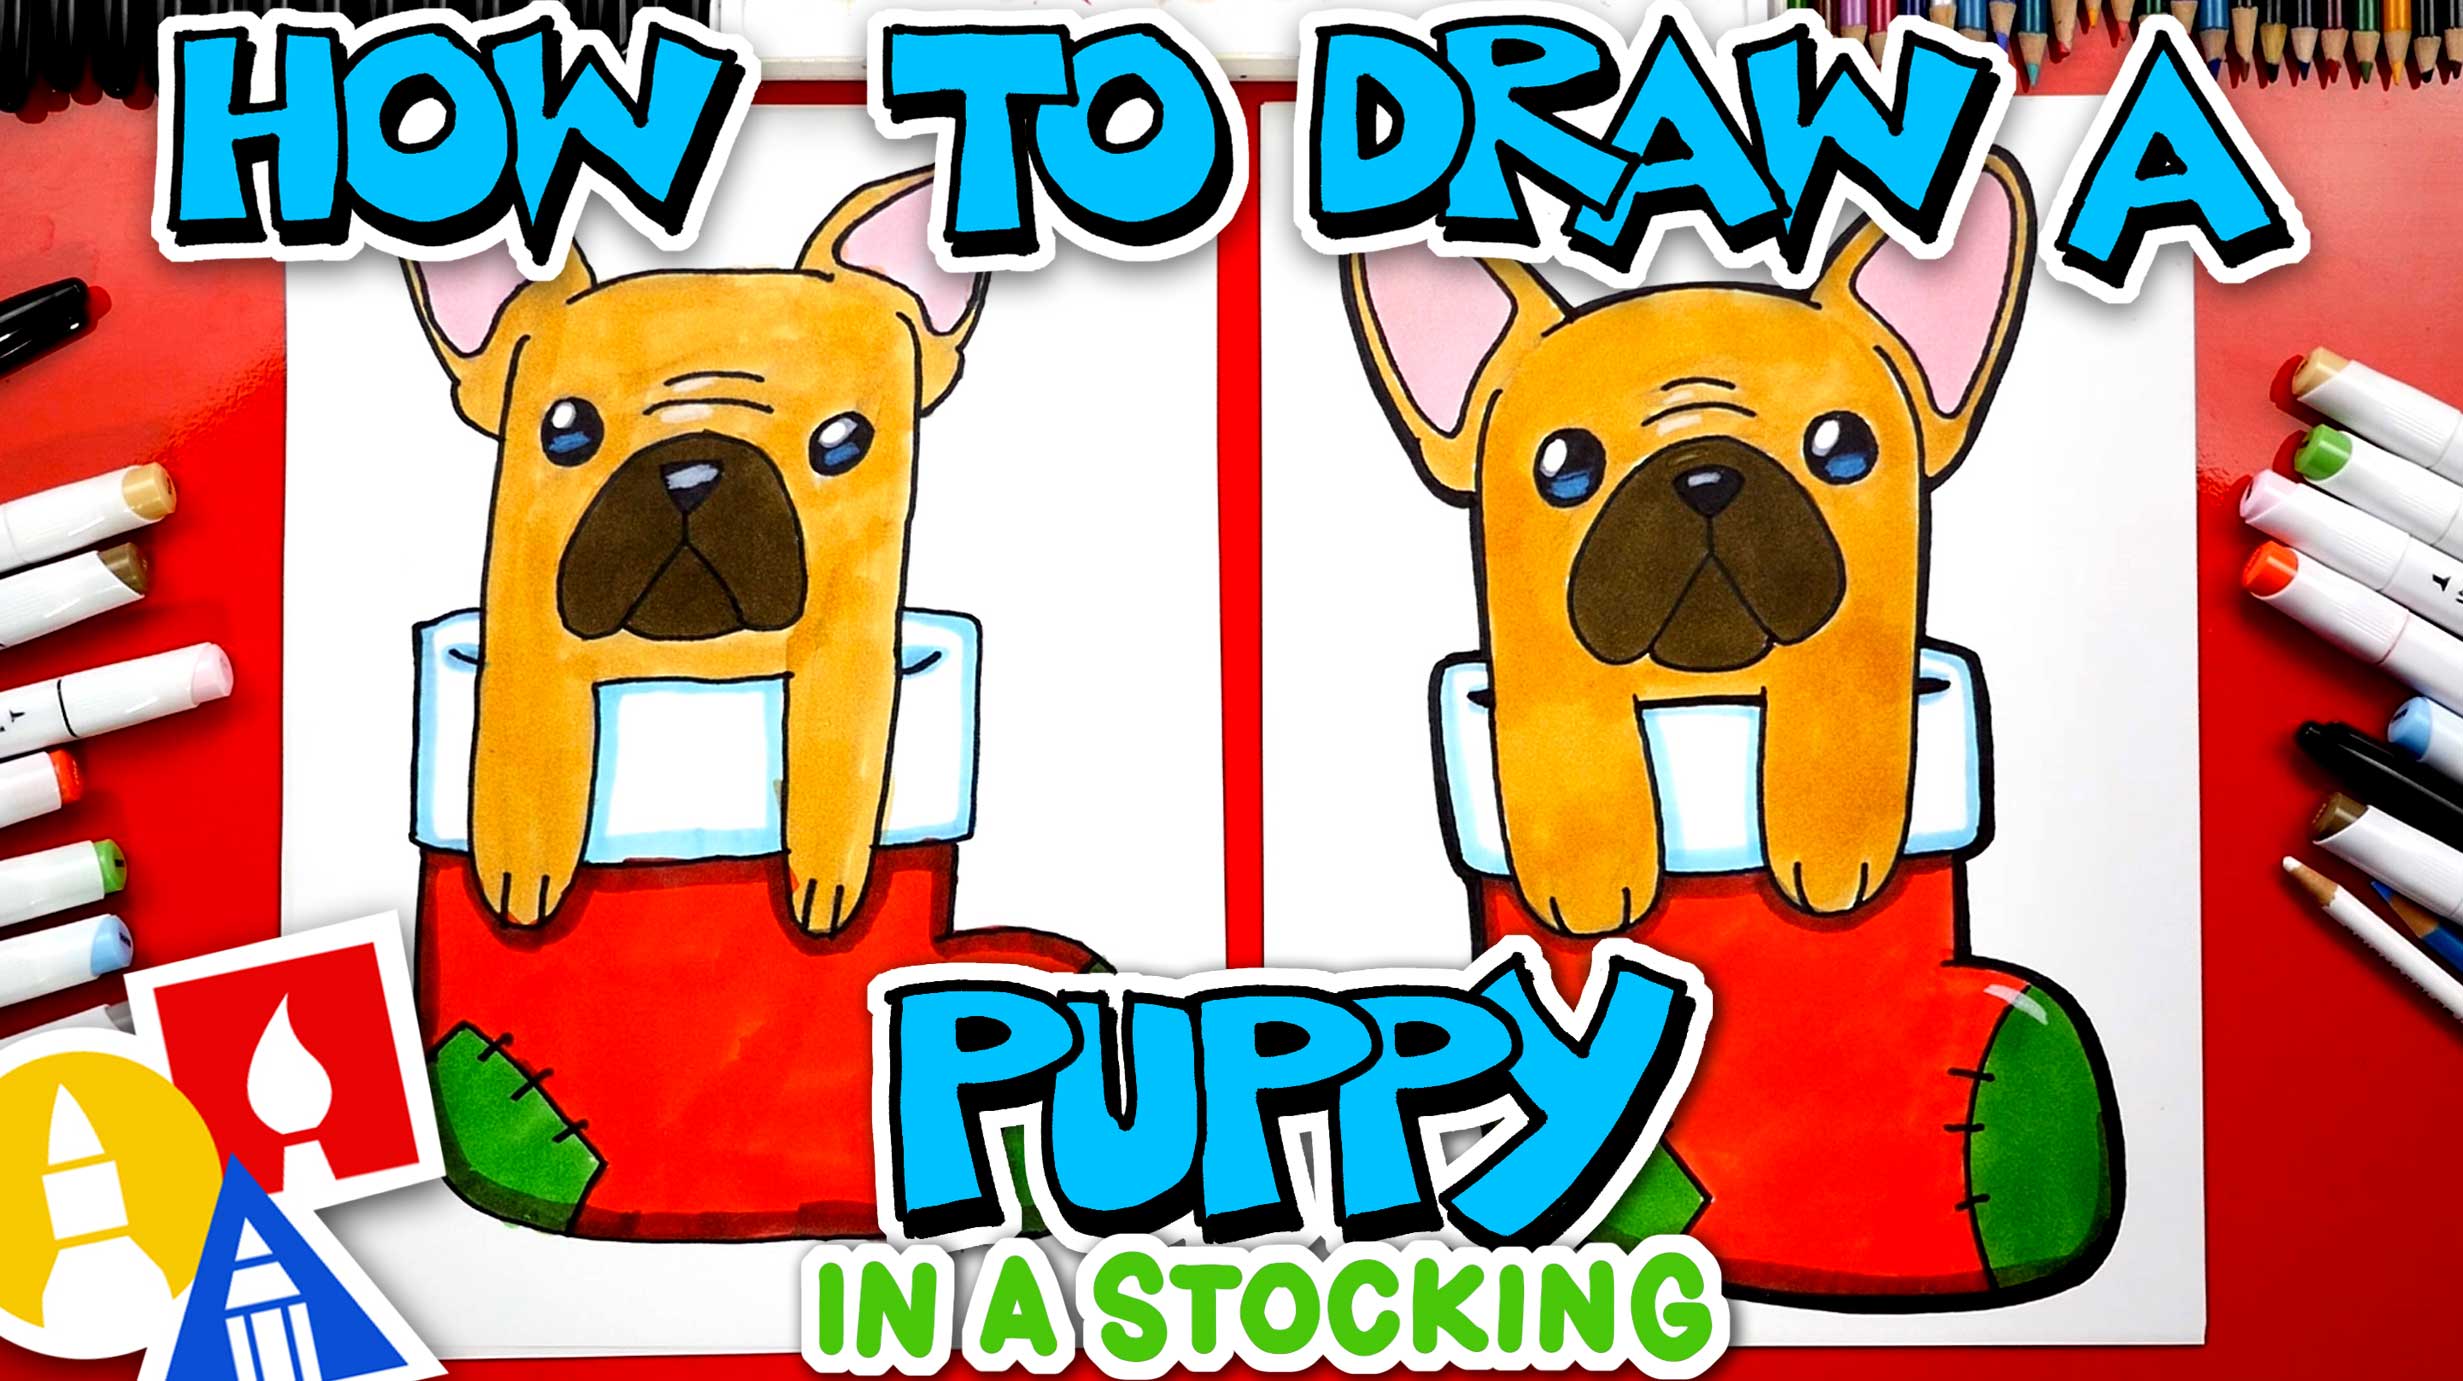 How To Draw A Puppy In A Stocking - Art For Kids Hub -